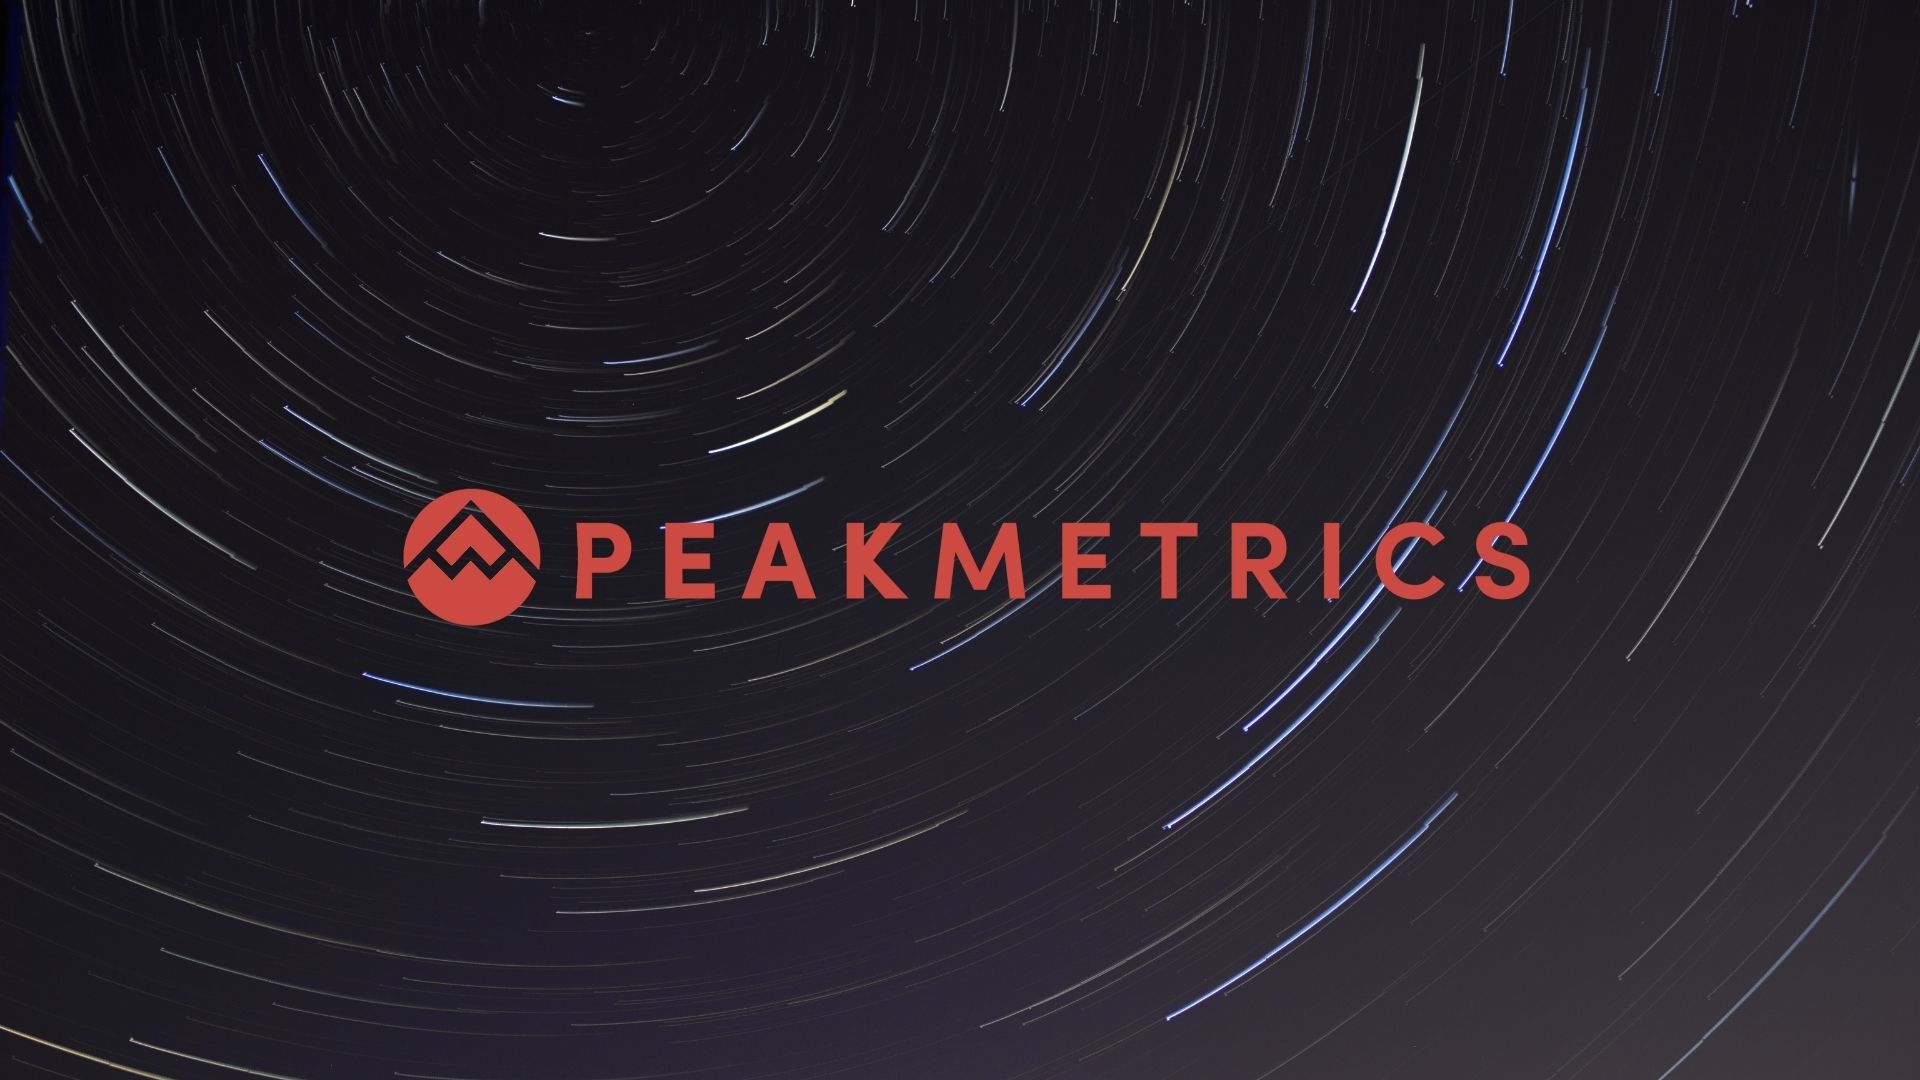 PeakMetrics and Reality Defender partner to combat digital deception and deepfakes at scale - SiliconANGLE